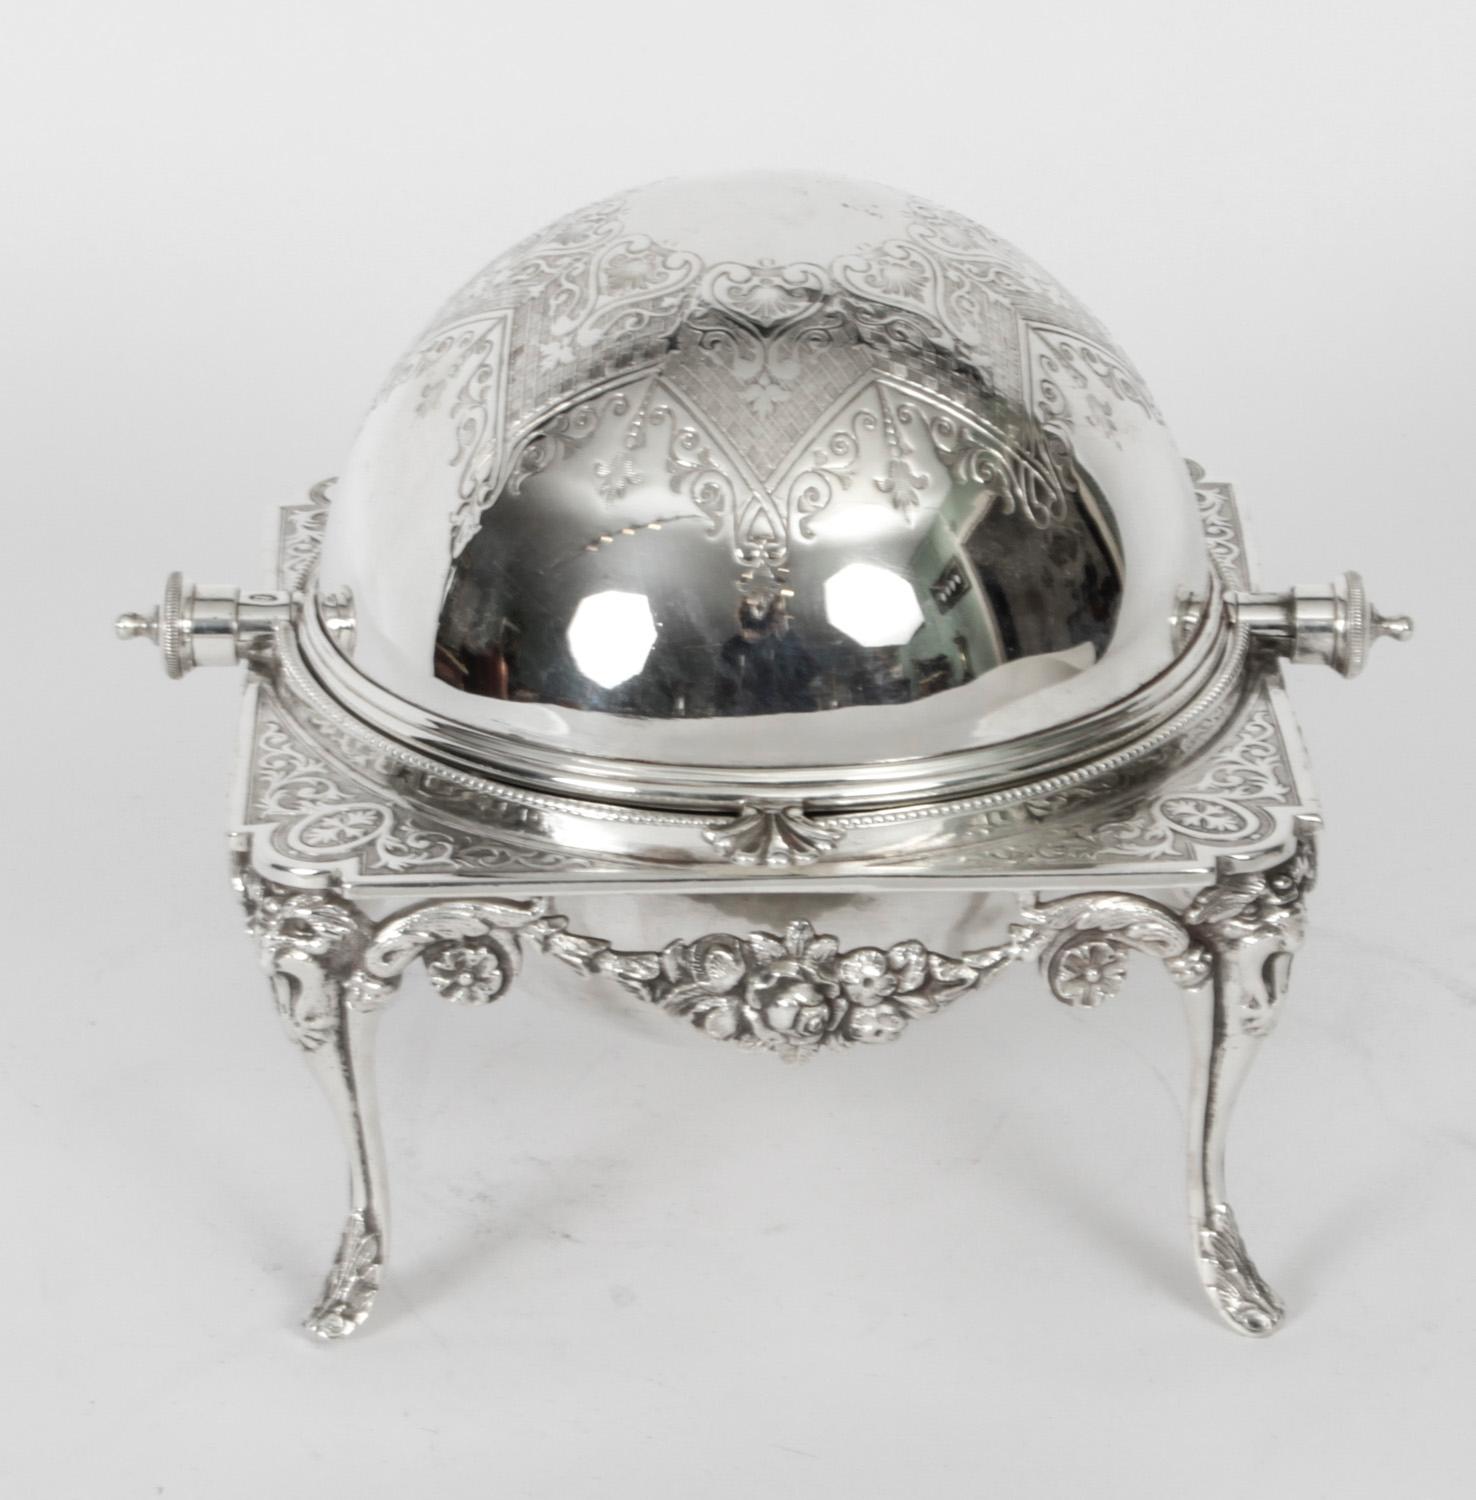 Antique English Silver Plated Roll Over Butter / Caviar Dish, 19th Century 1